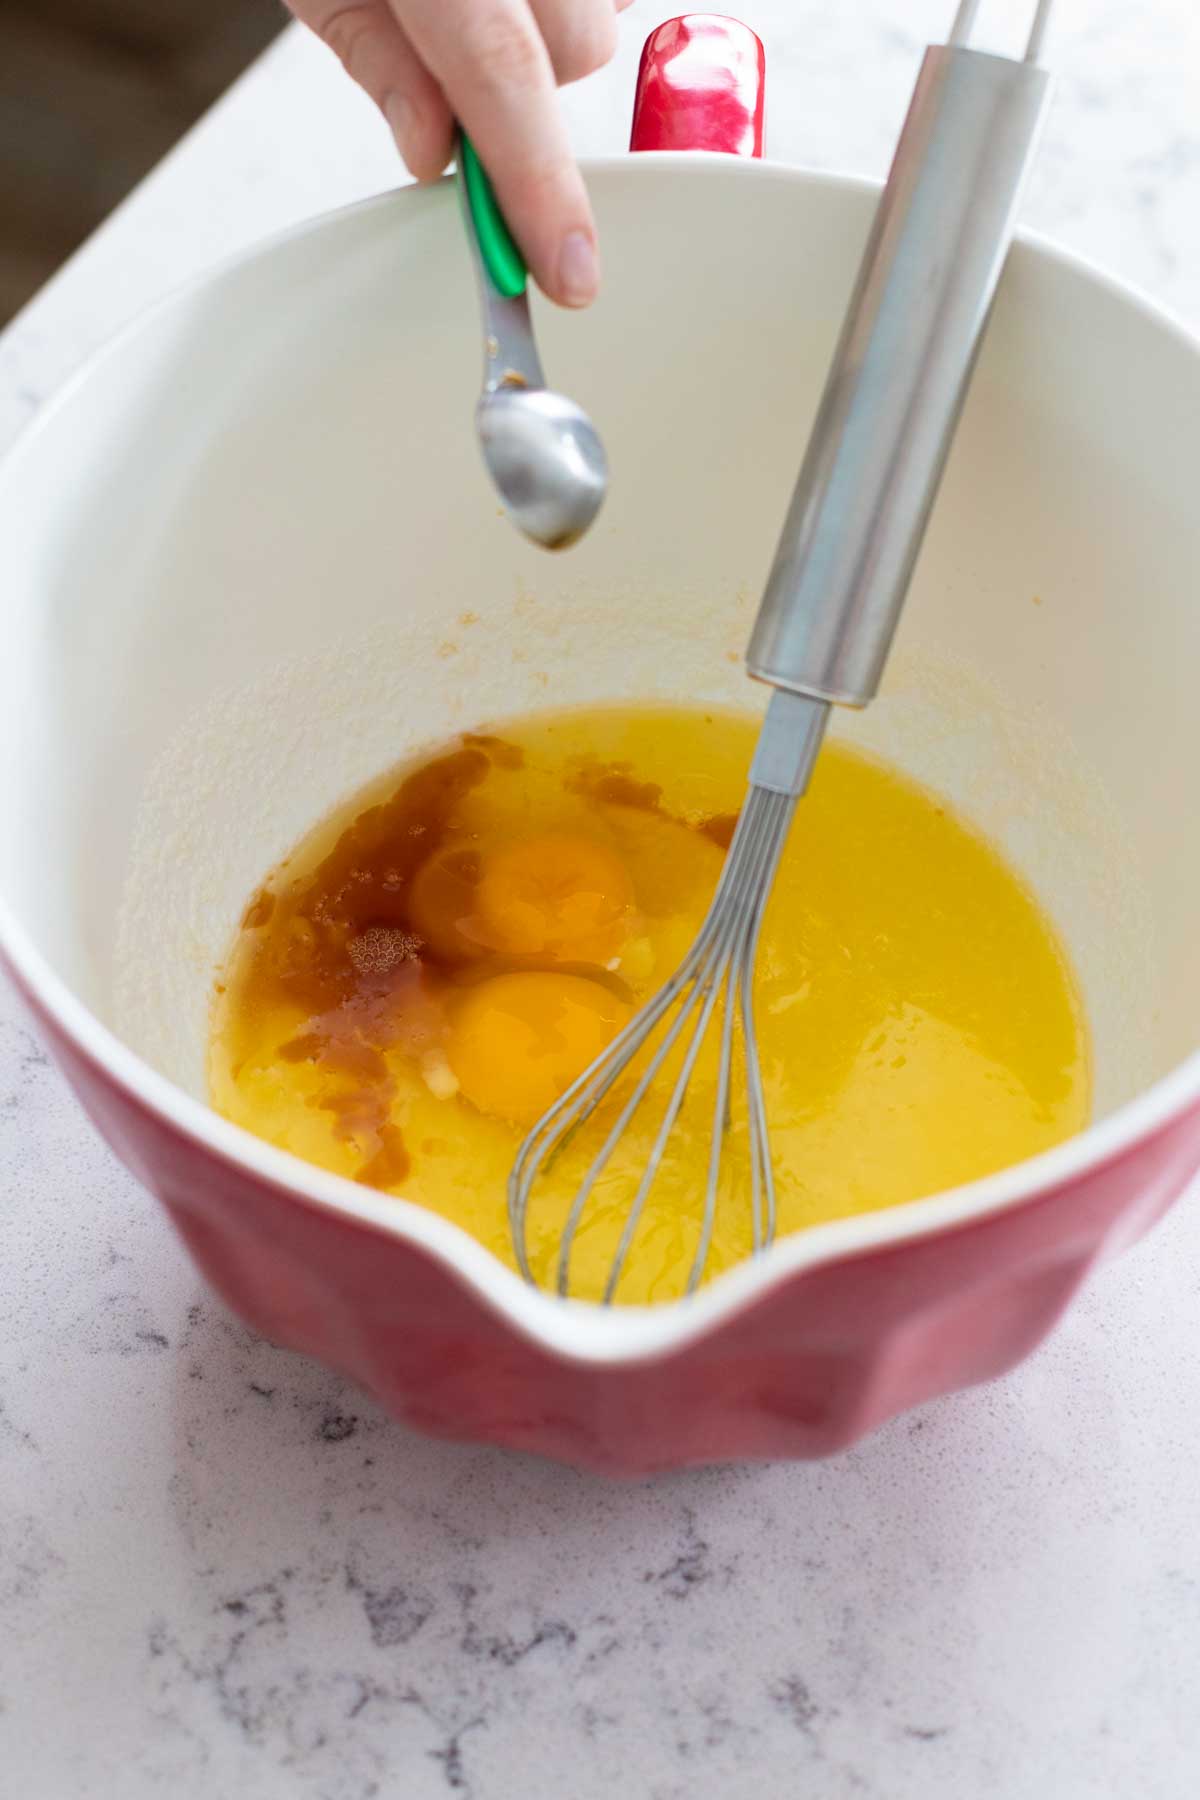 The eggs and vanilla have been added to the batter bowl.